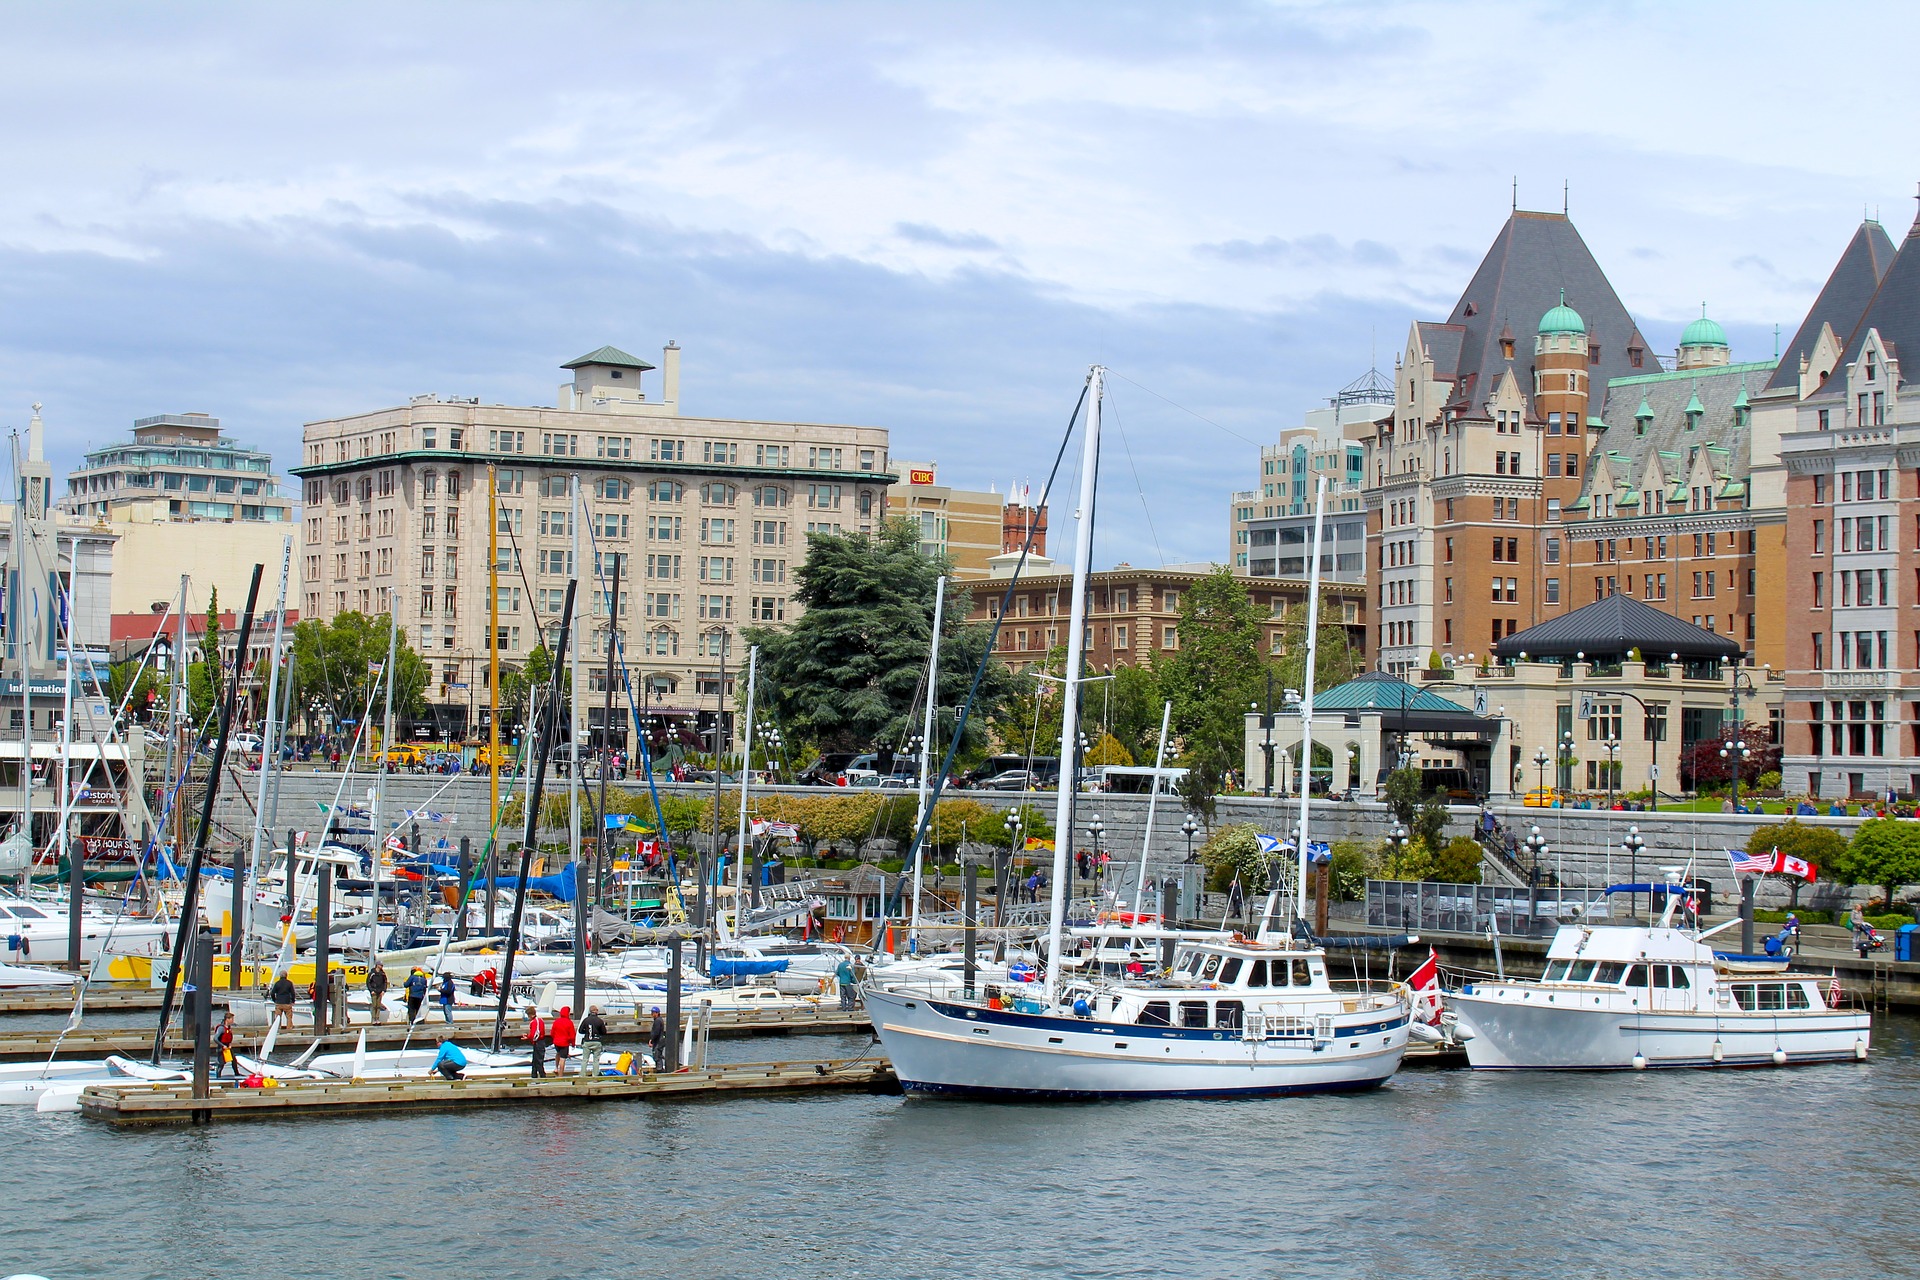 A harbour filled with yachts. Close behind are a city street and a grand hotel.